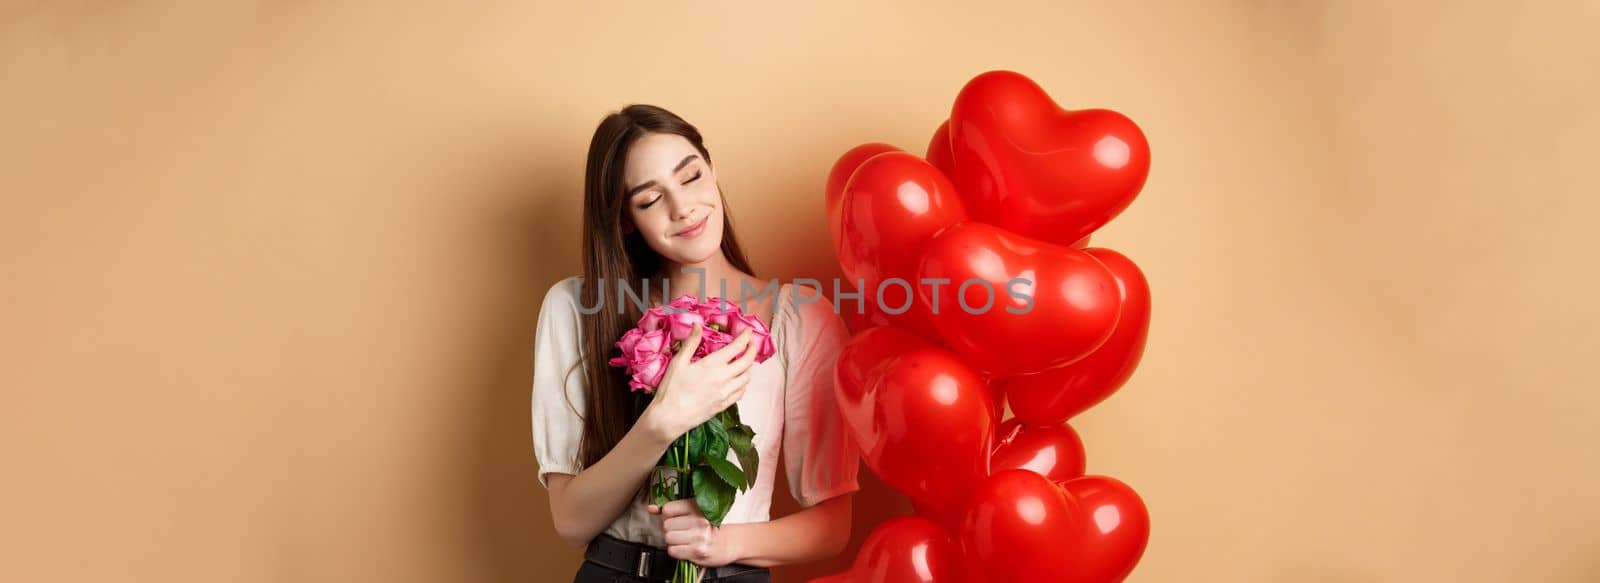 Sensual and romantic girl hugging bouquet of pink roses, smiling with eyes closed, thinking of lover, standing near Valentines day heart balloons, beige background by Benzoix